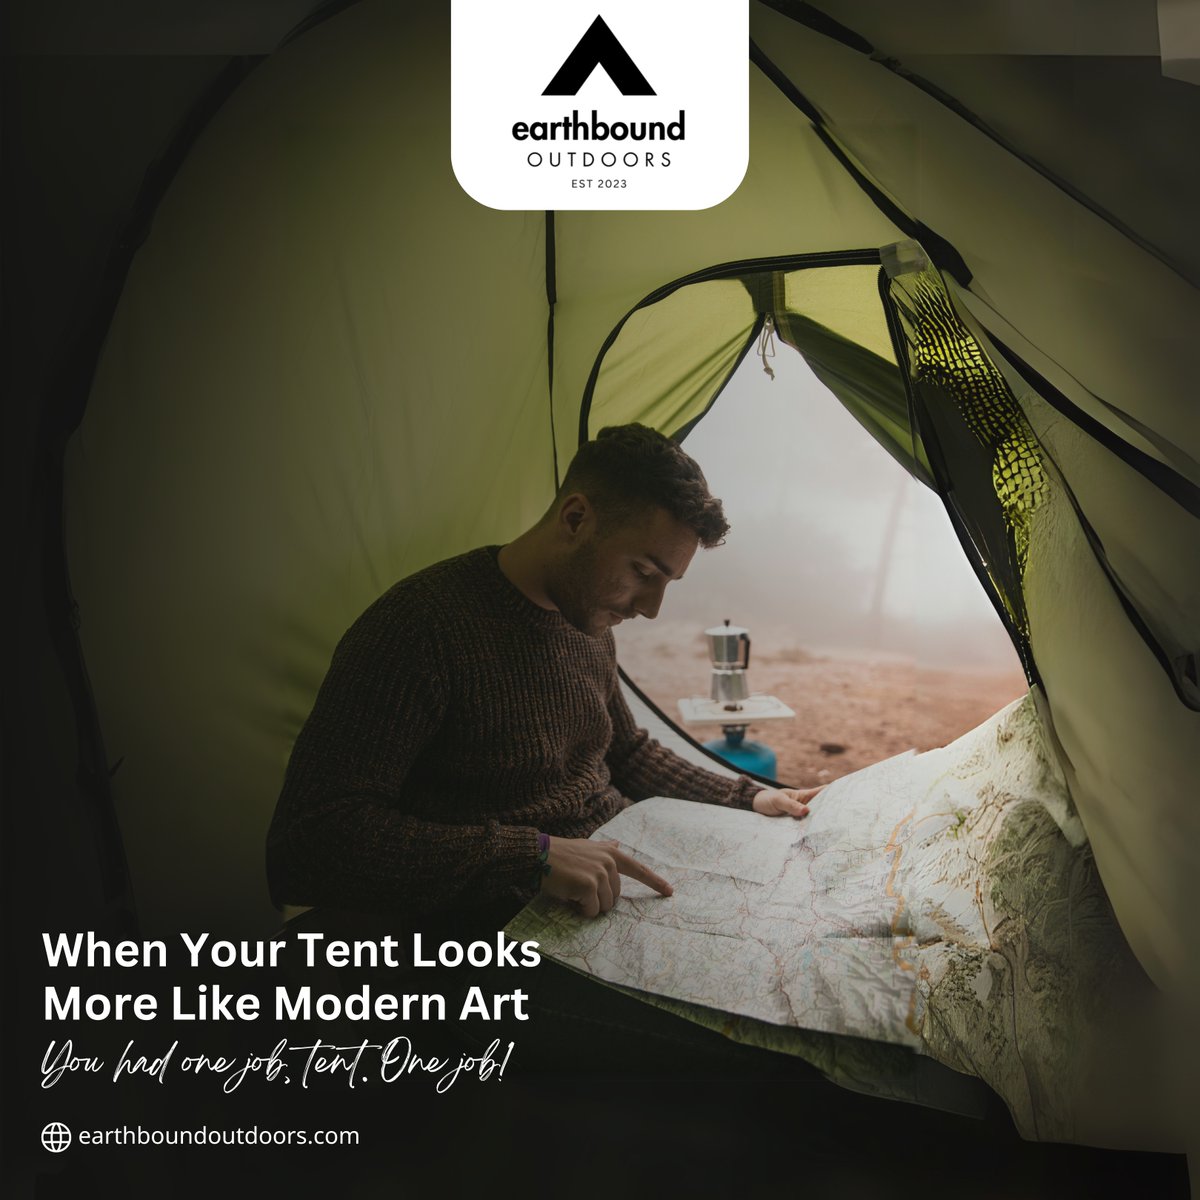 Ever felt like you needed a degree in tent engineering? Hit like if you've ever battled with a tent pole! Share your funniest camping fail in the comments! 🏕️😂 #CampingStruggles #TentLife #CampingHacks #CampingExperience #CampingStories #CampingFails #CampingFun